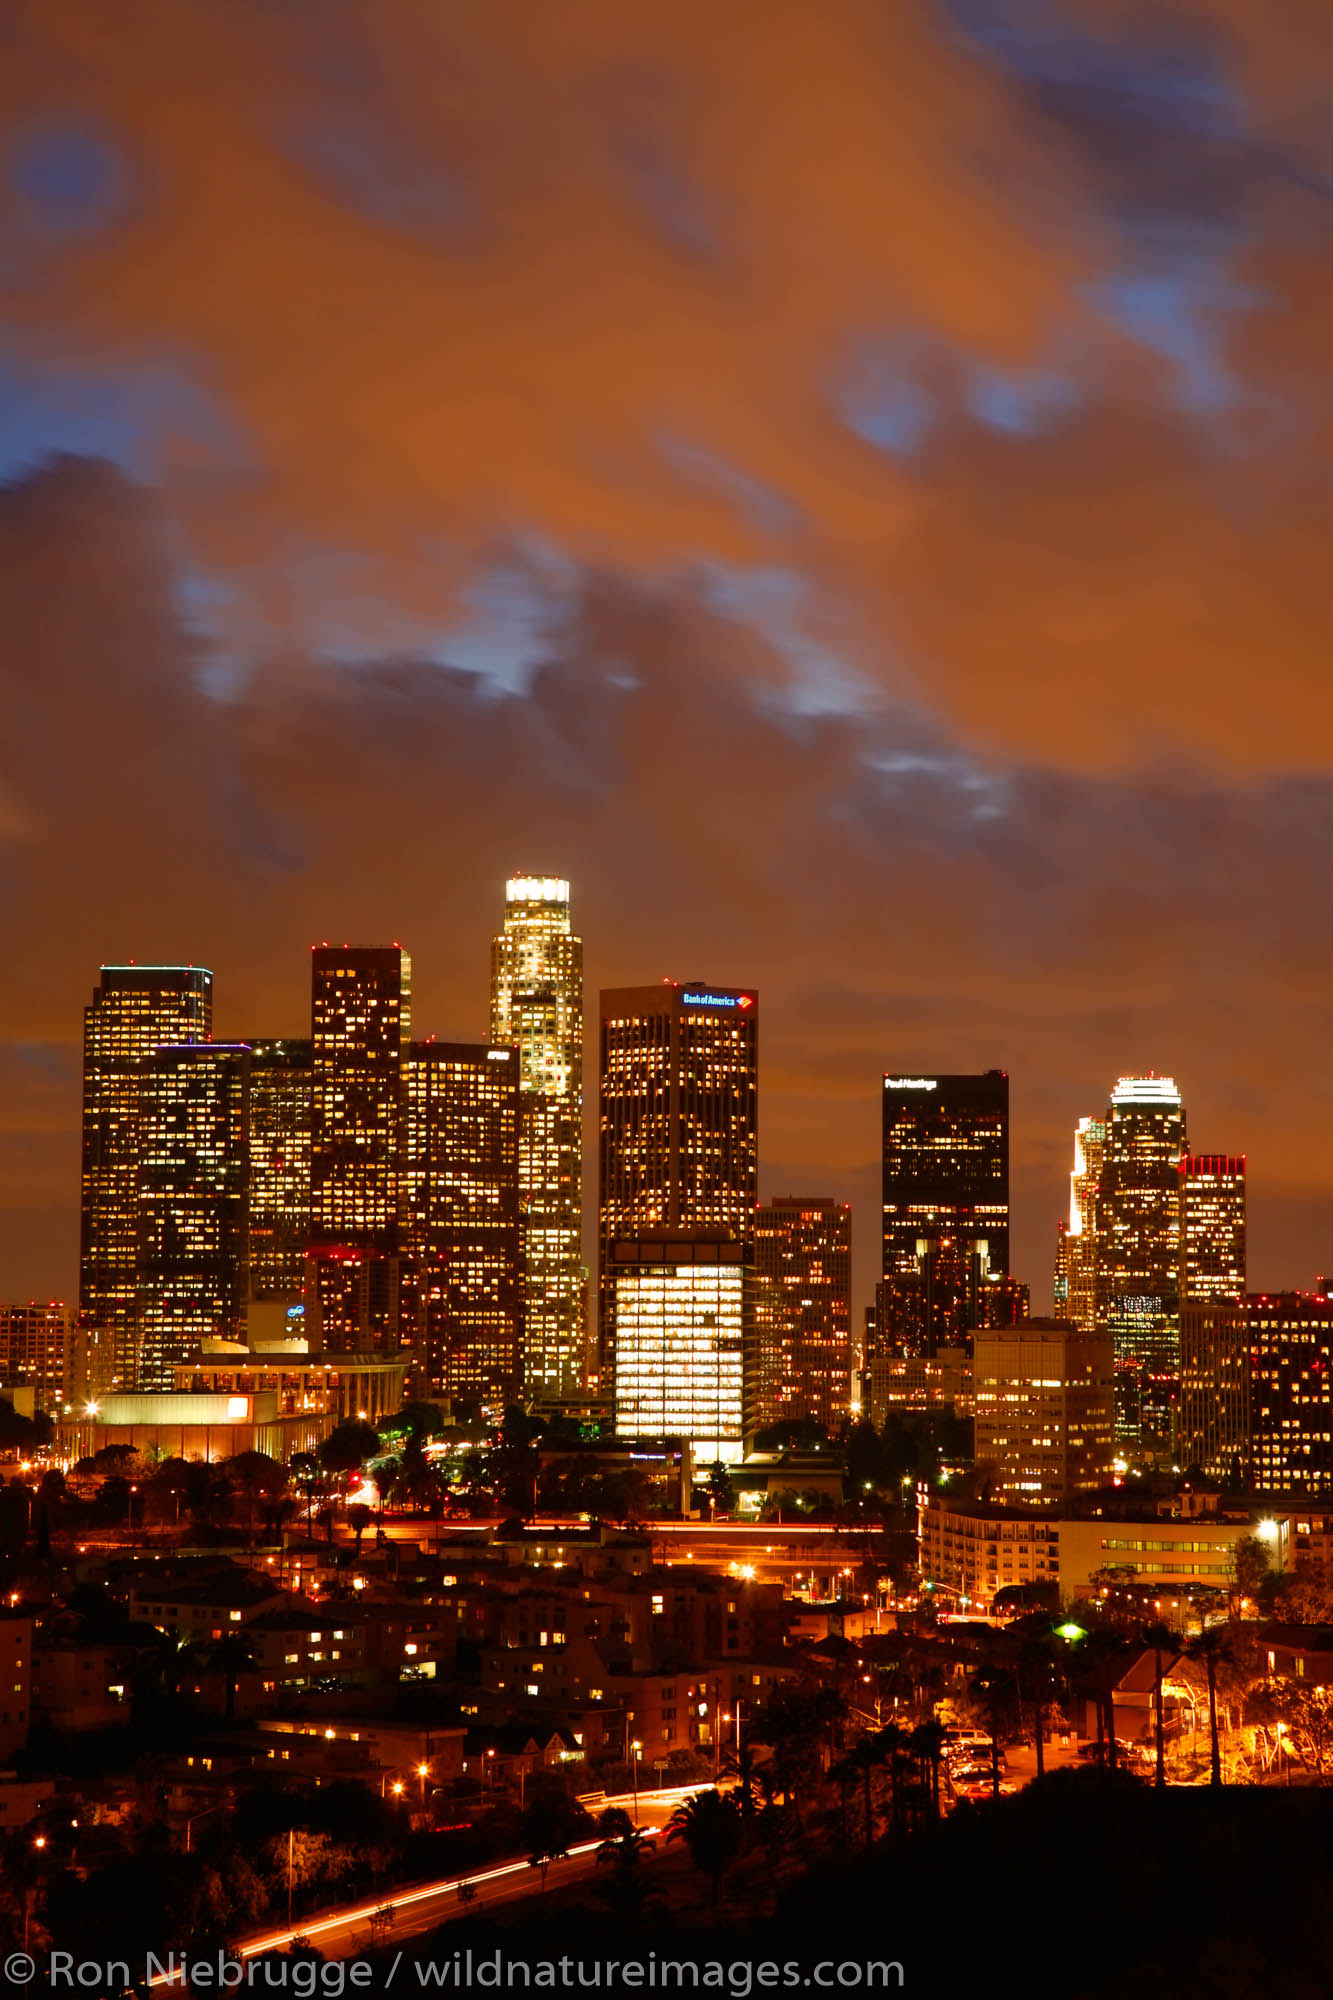 Los Angeles city skyline in the evening, Los Angeles, California.